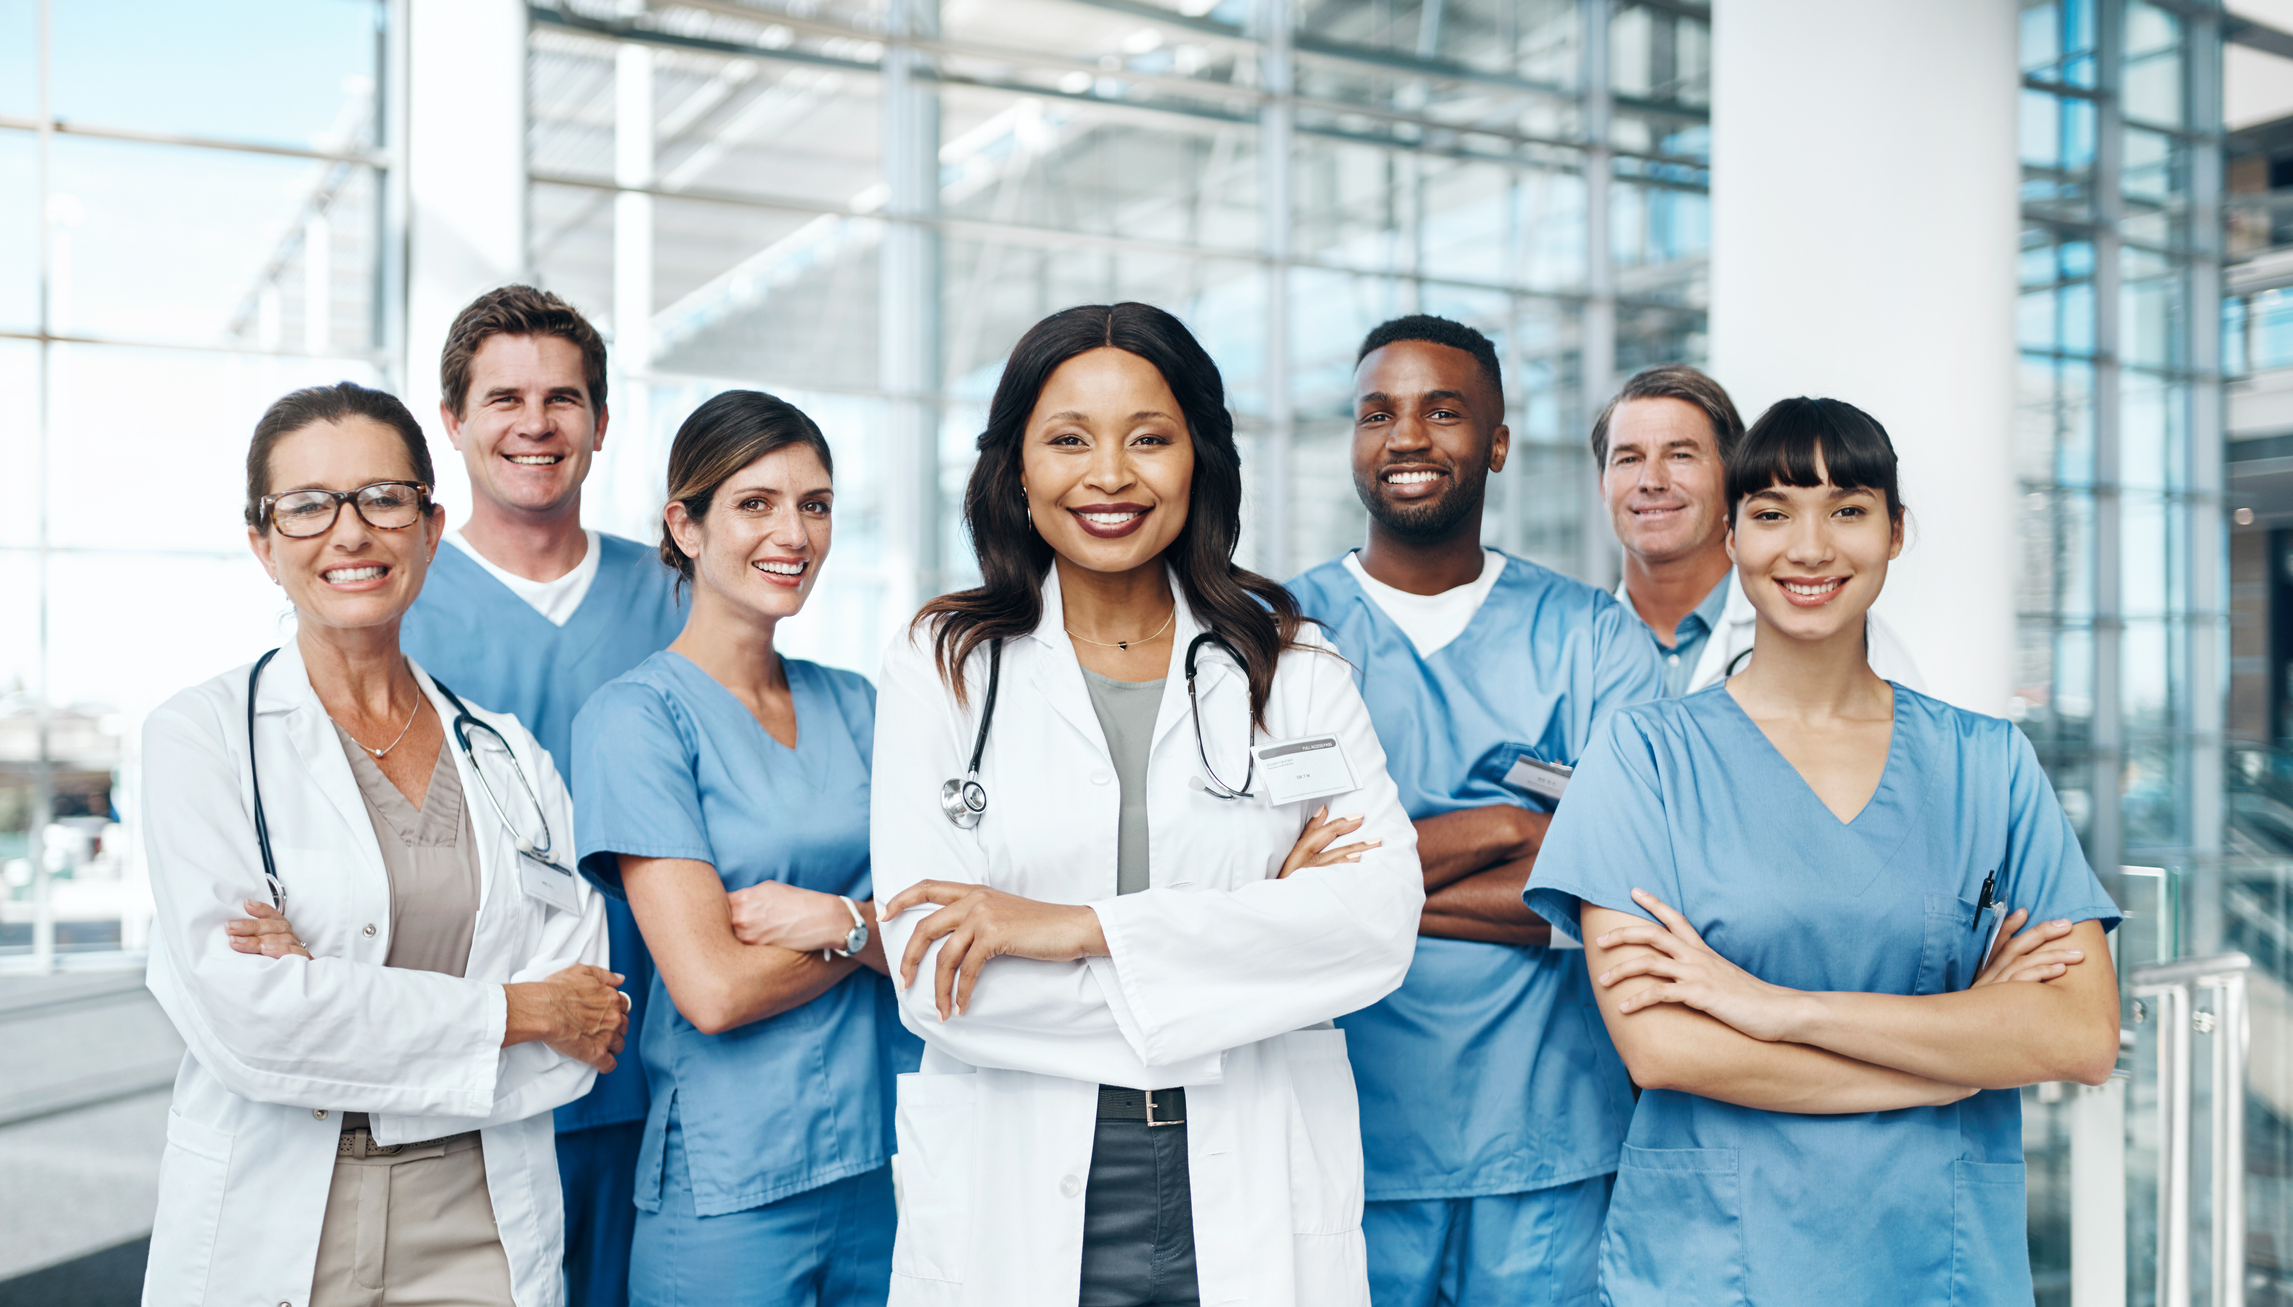 Diverse group of medical professionals crossing arms and smiling.